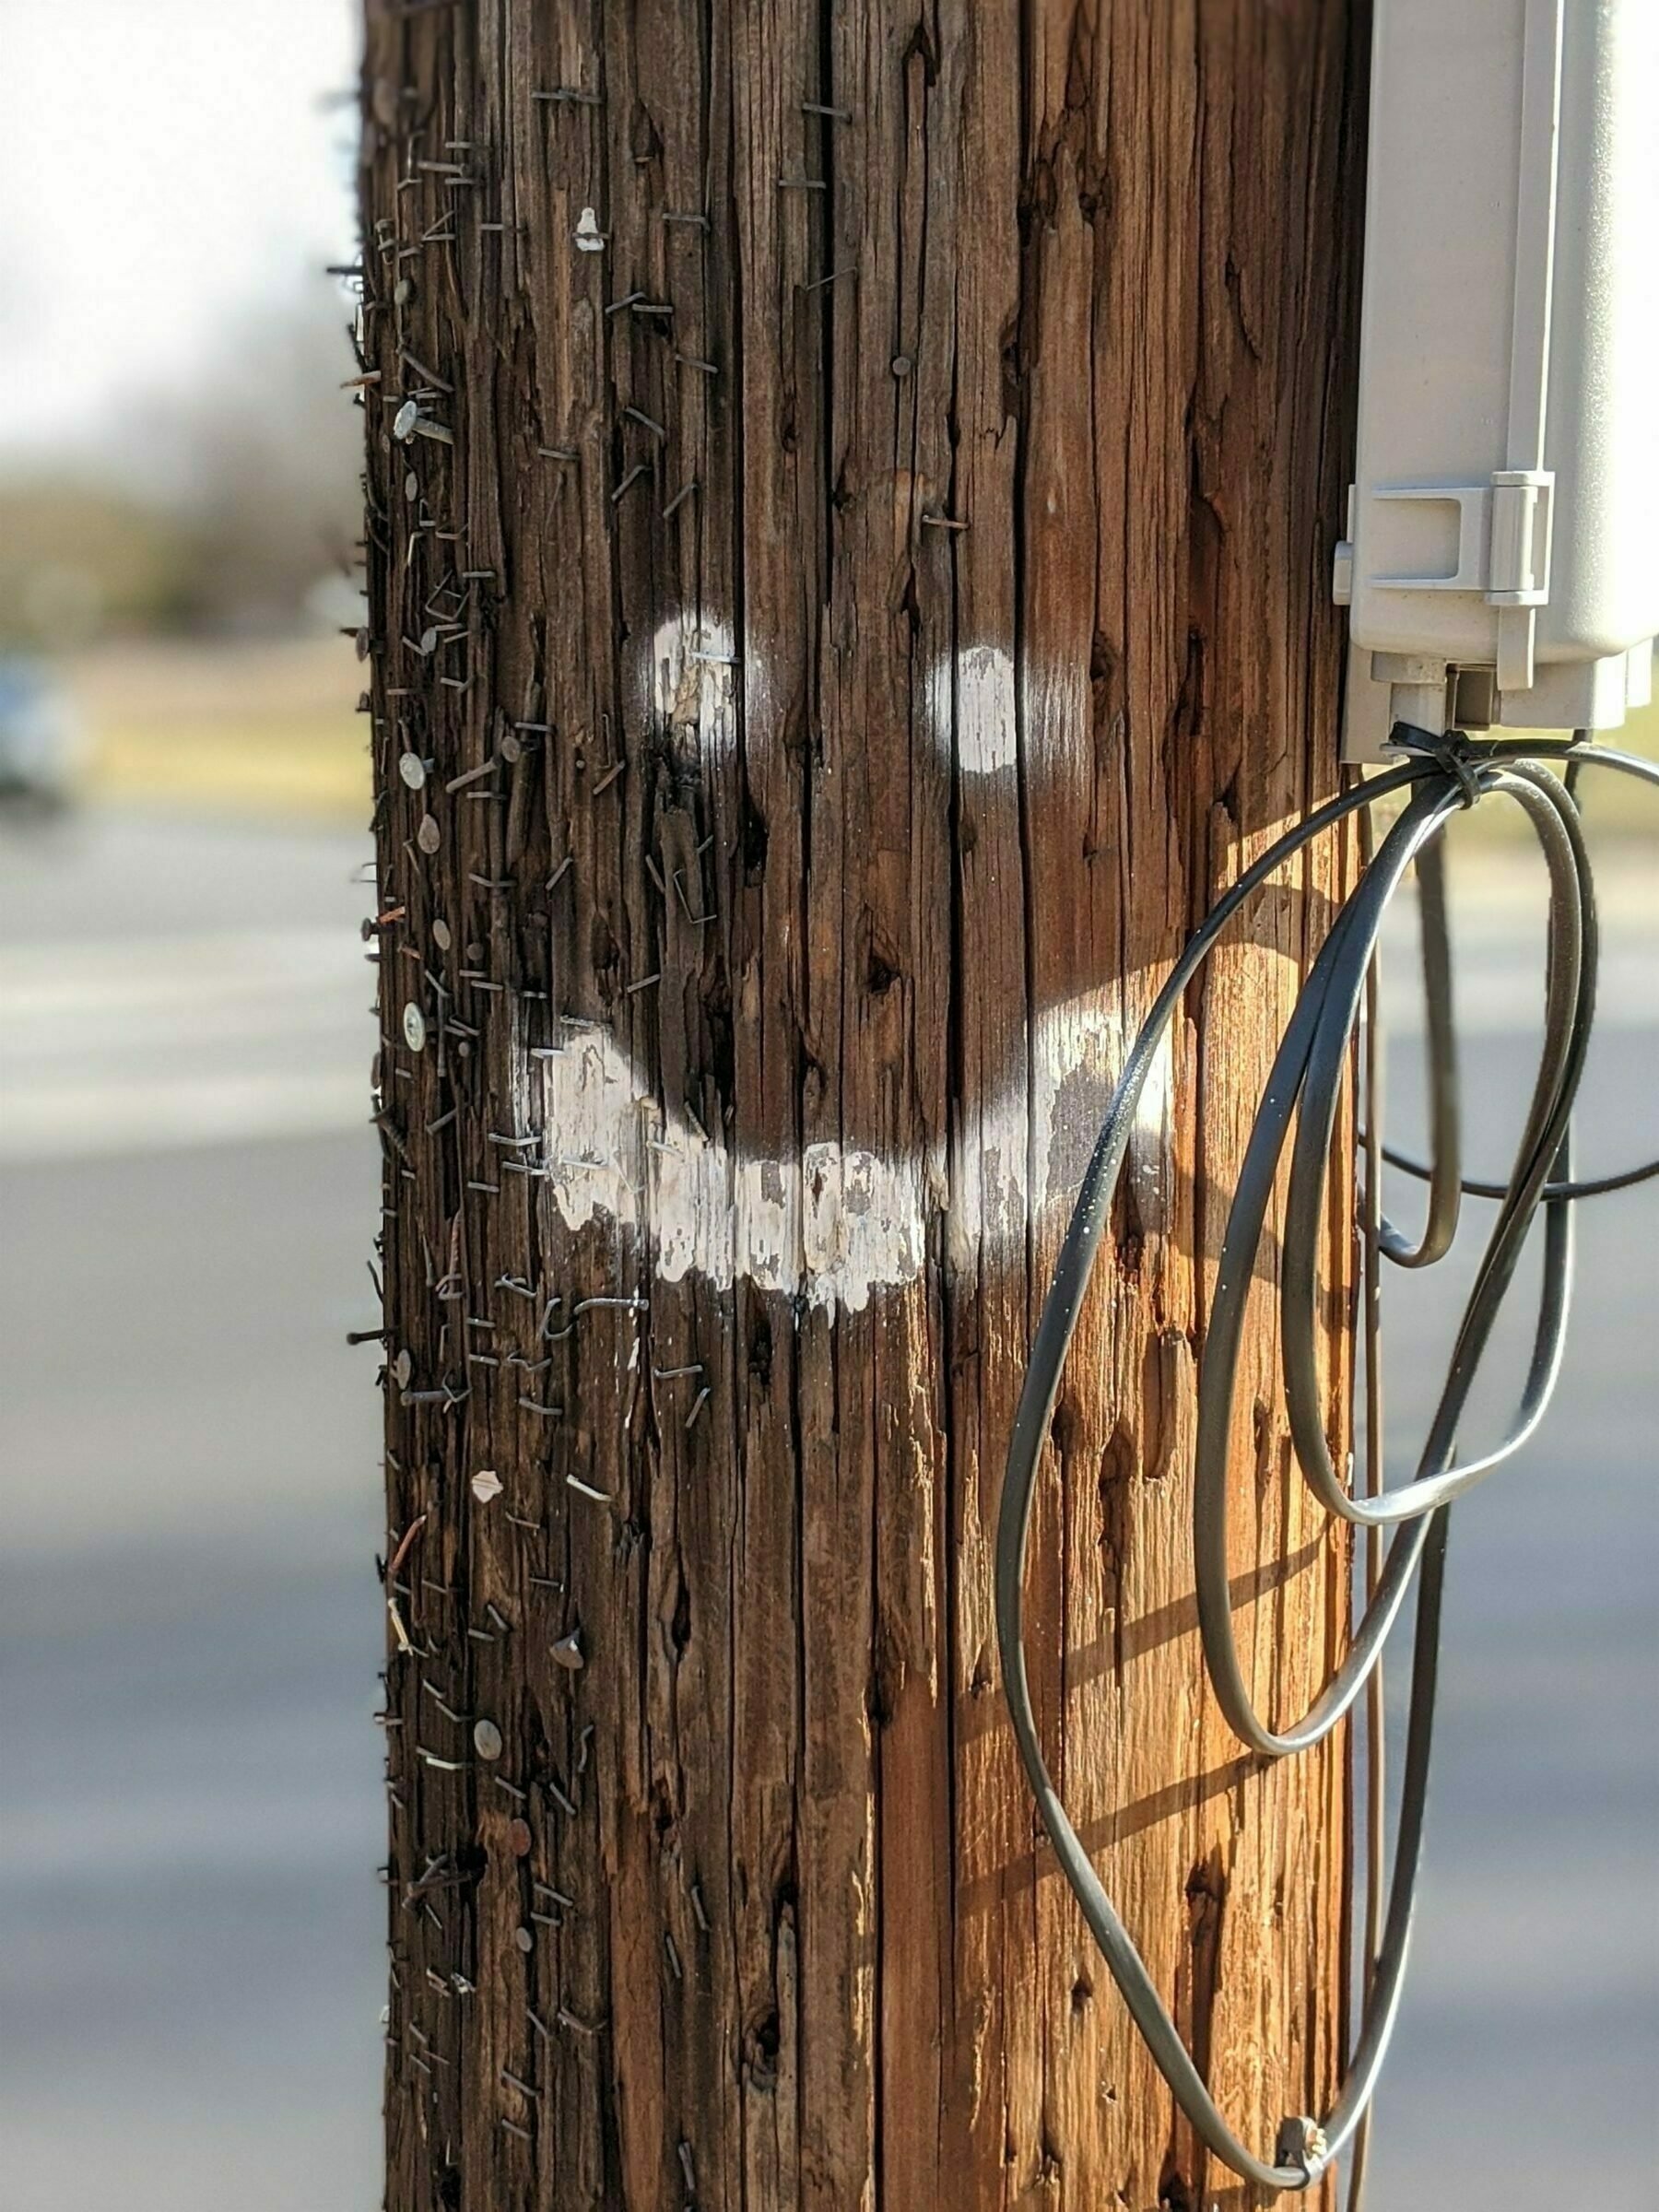 Telephone poll with smiley face spray painted on. 